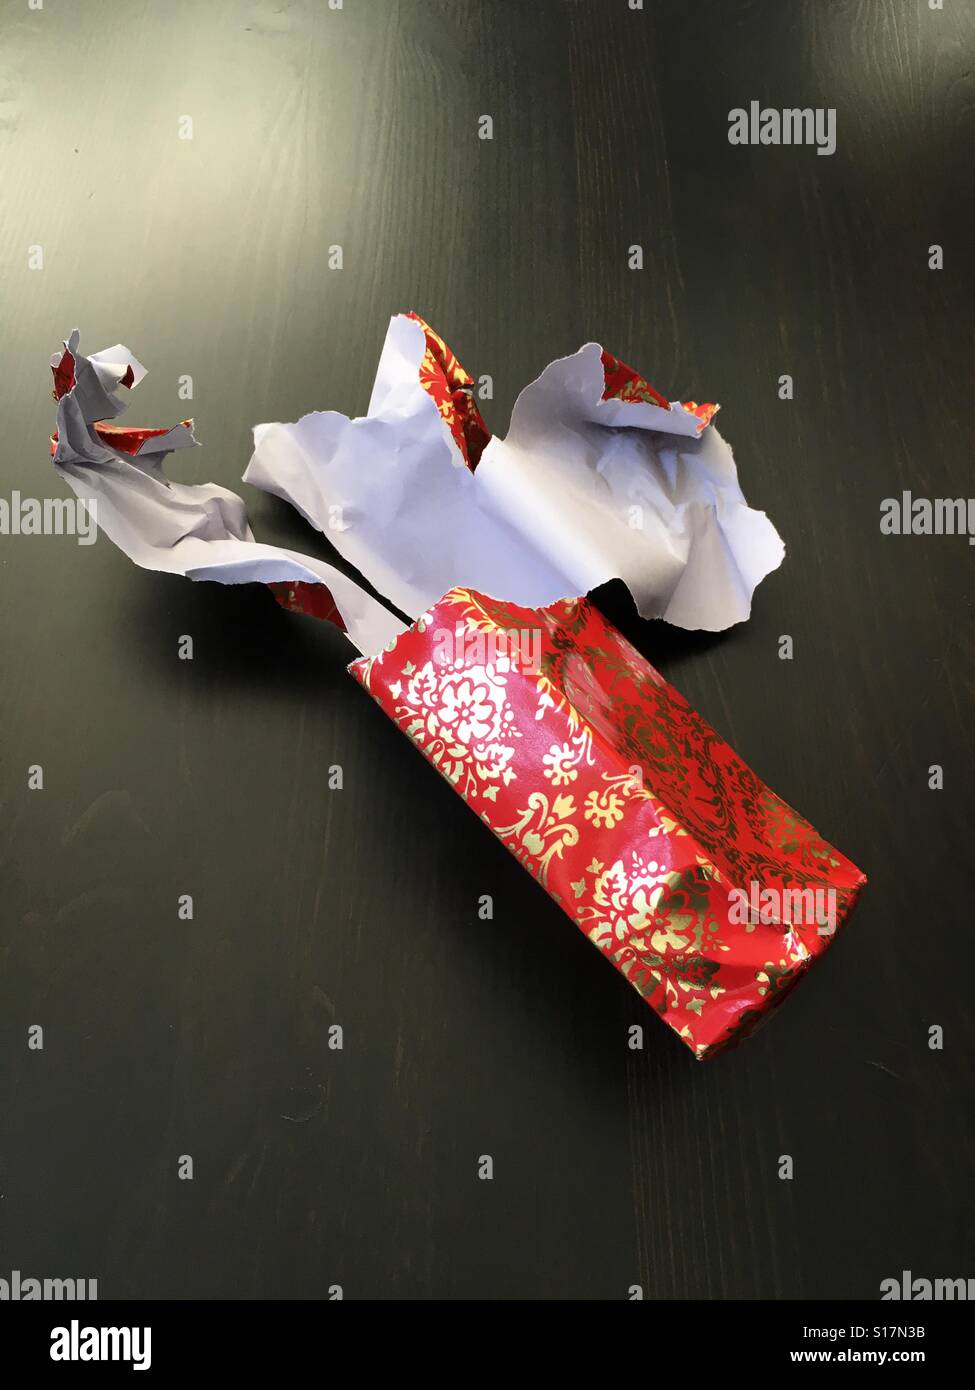 Roped open Christmas gift paper Stock Photo